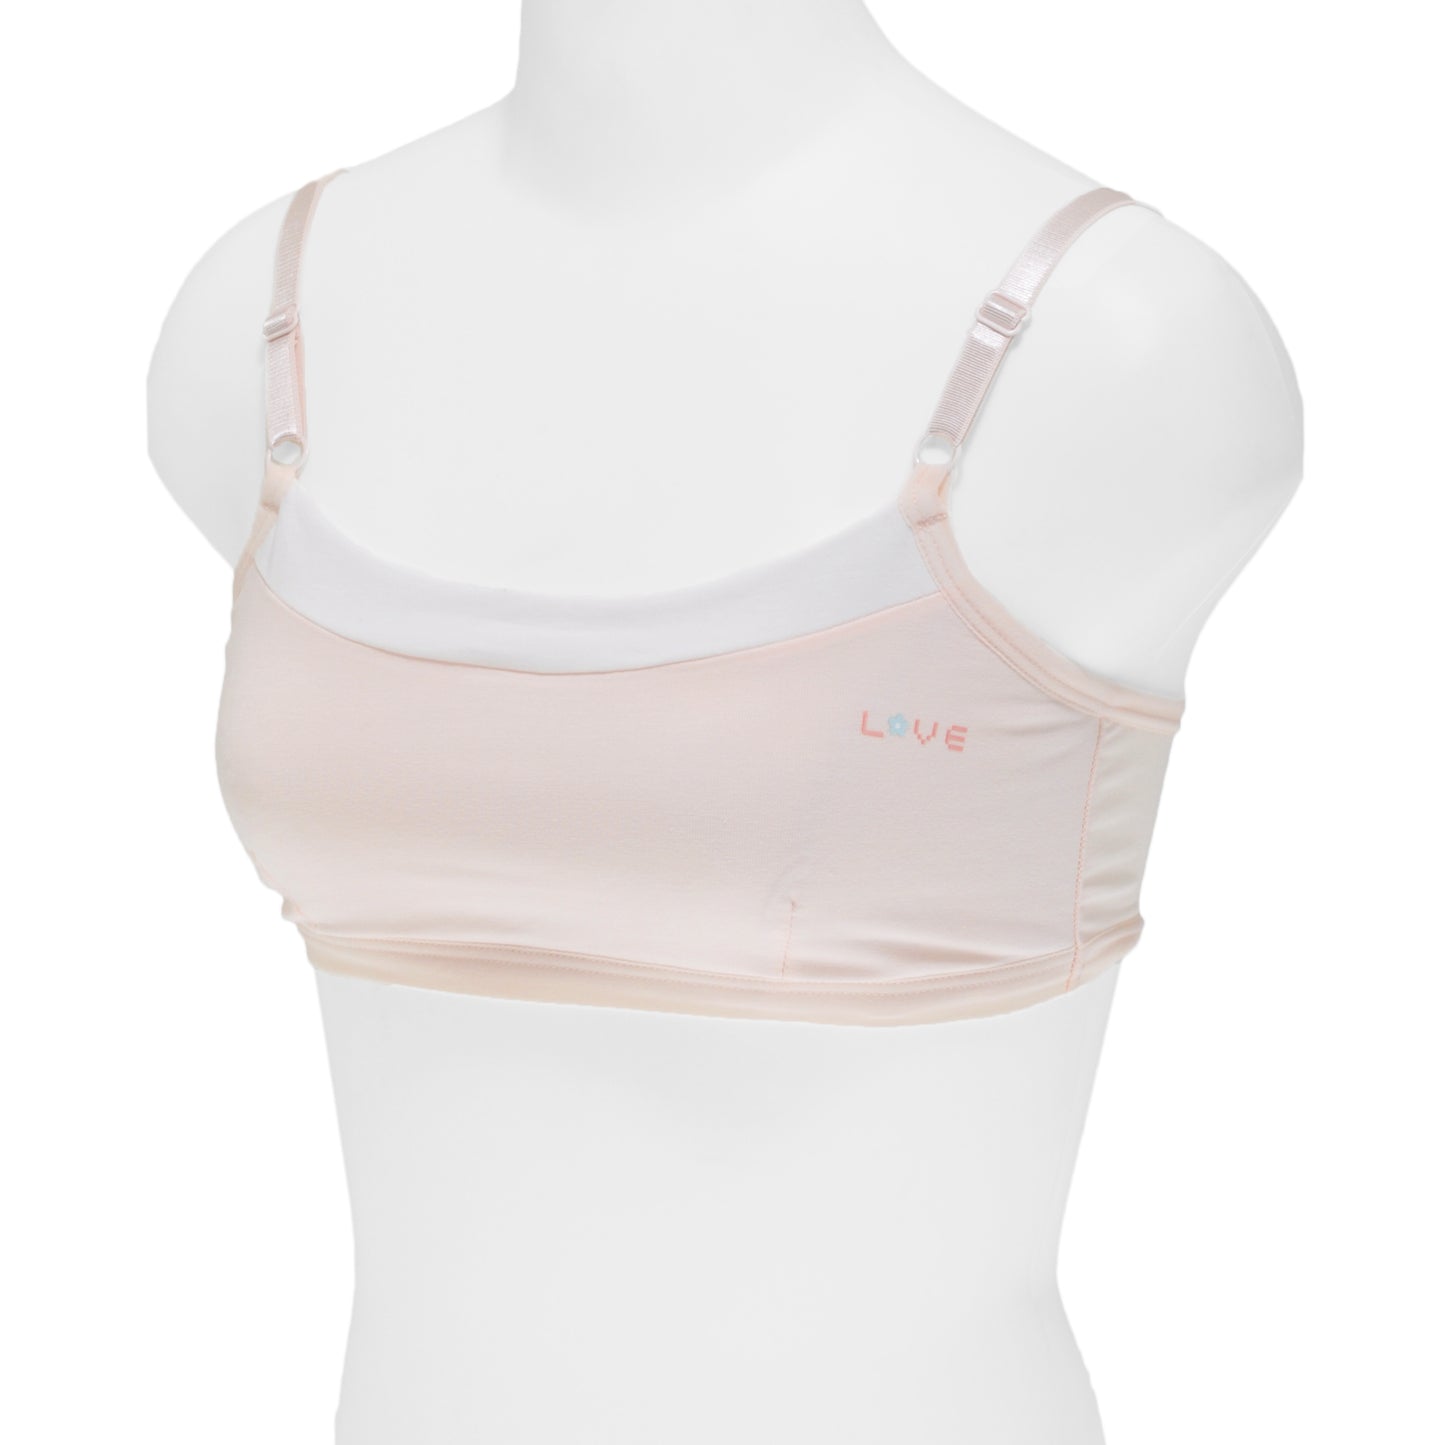 Girl's Wire-free Cotton Training Bra with Love Detail (6-Pack)